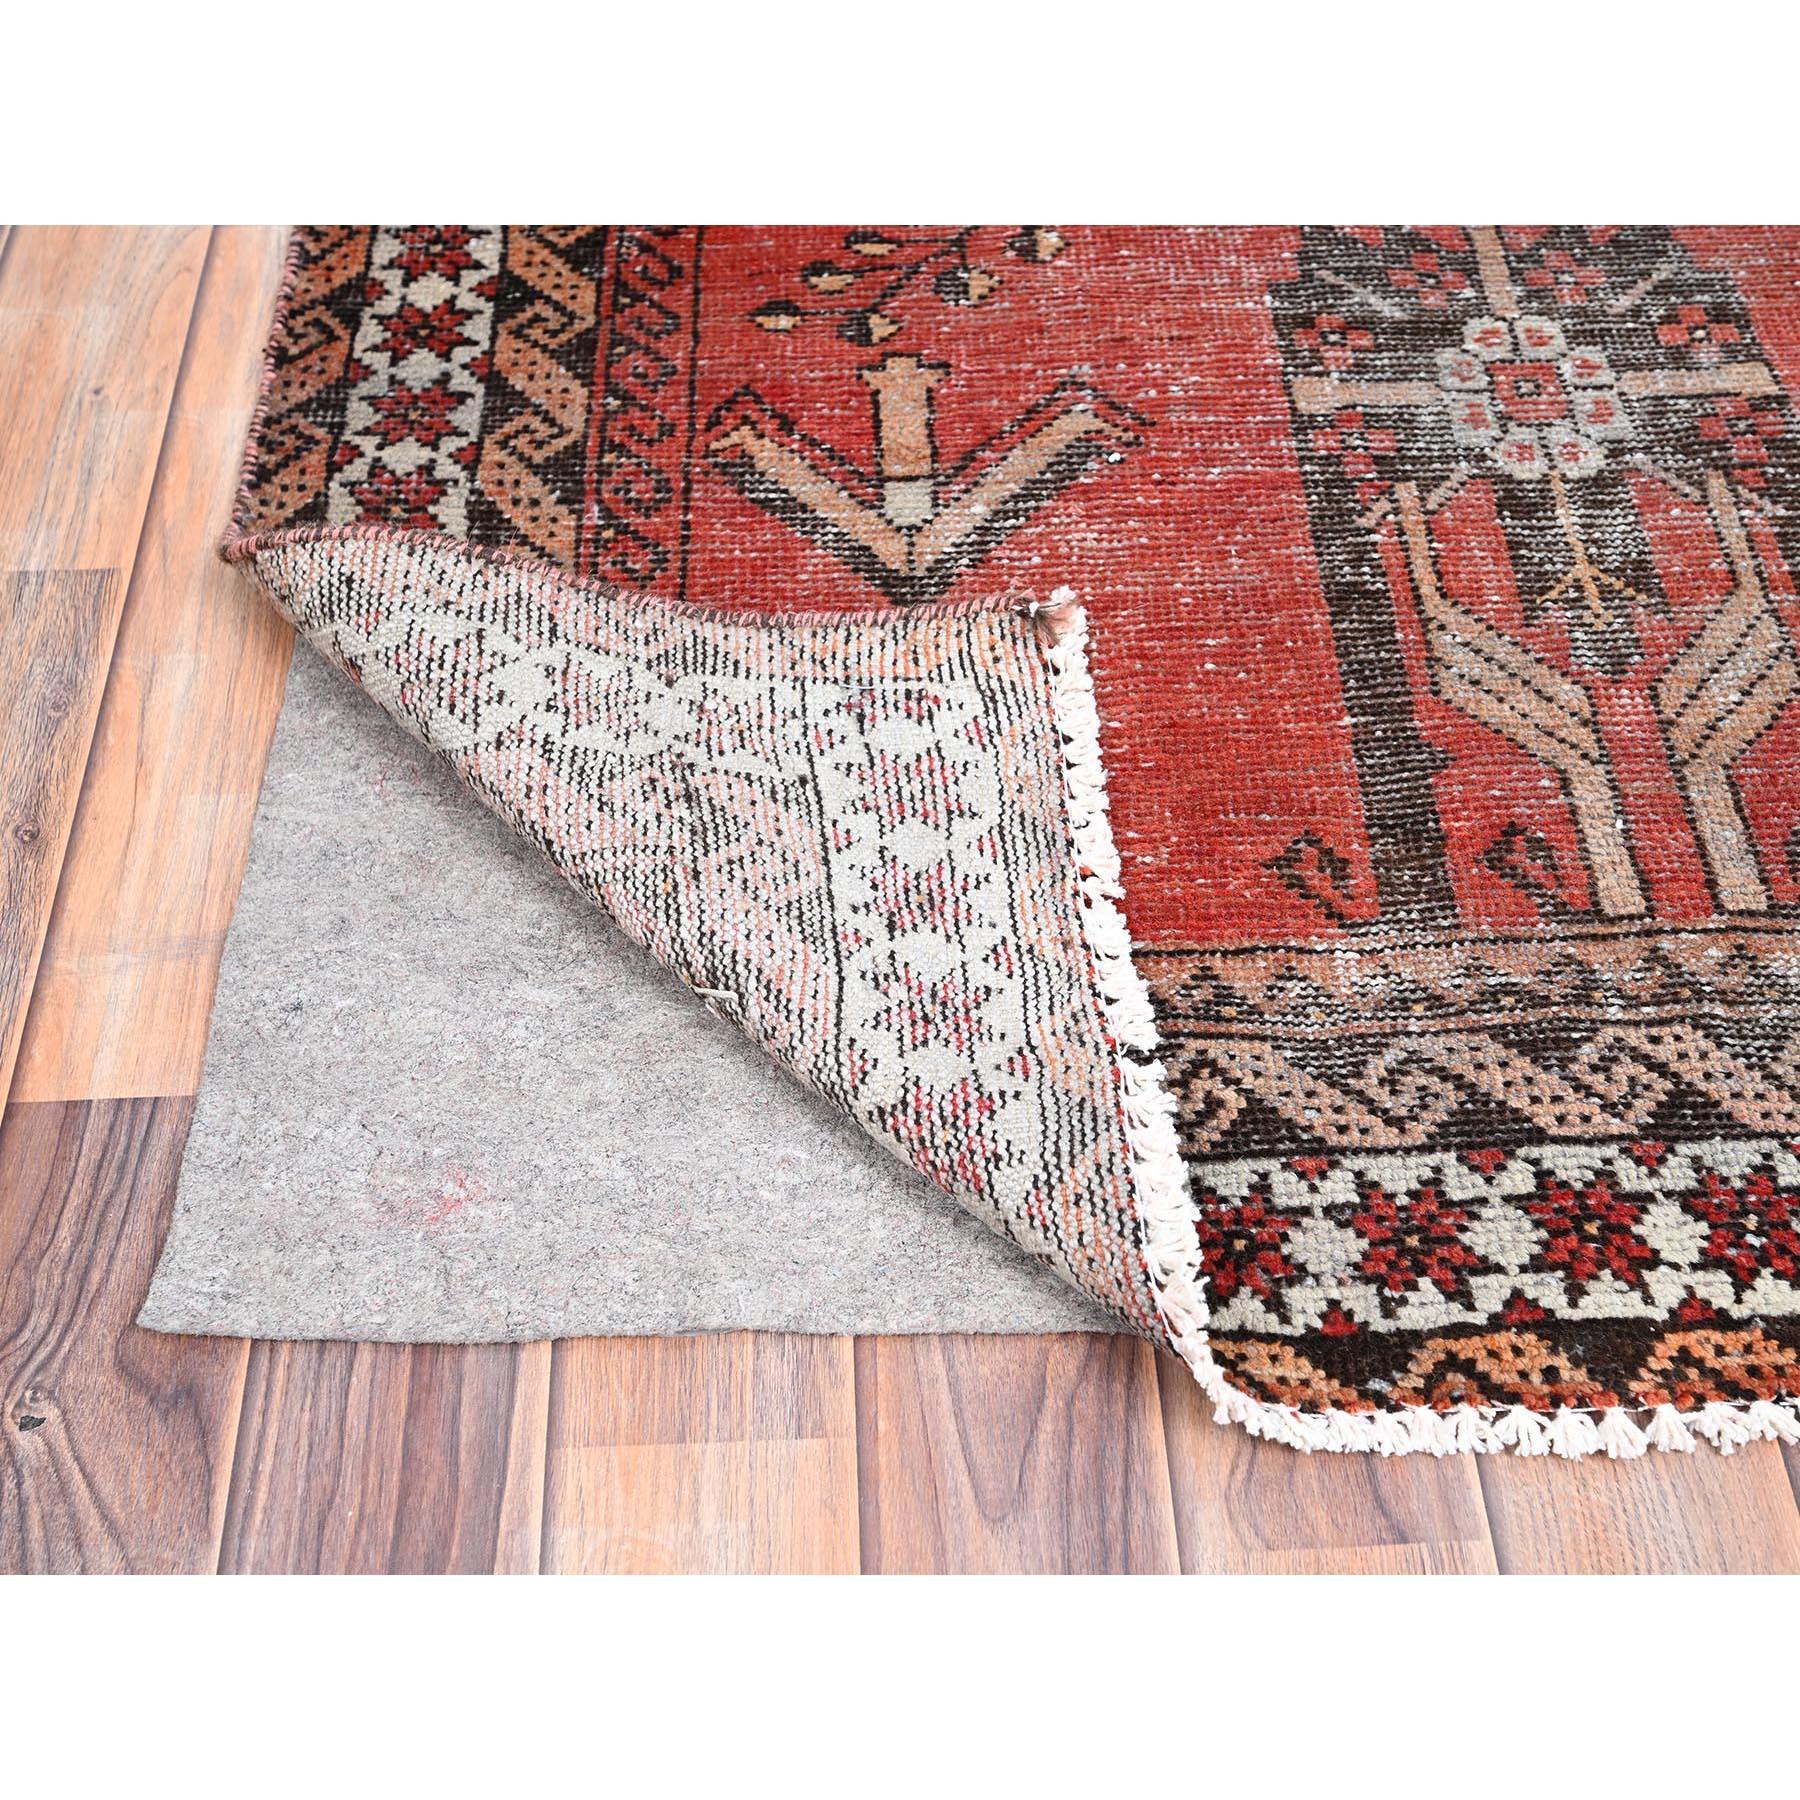 Medieval Red Vintage Persian Baluch Rustic Evenly Worn Pure Wool Hand Knotted Clean Rug For Sale